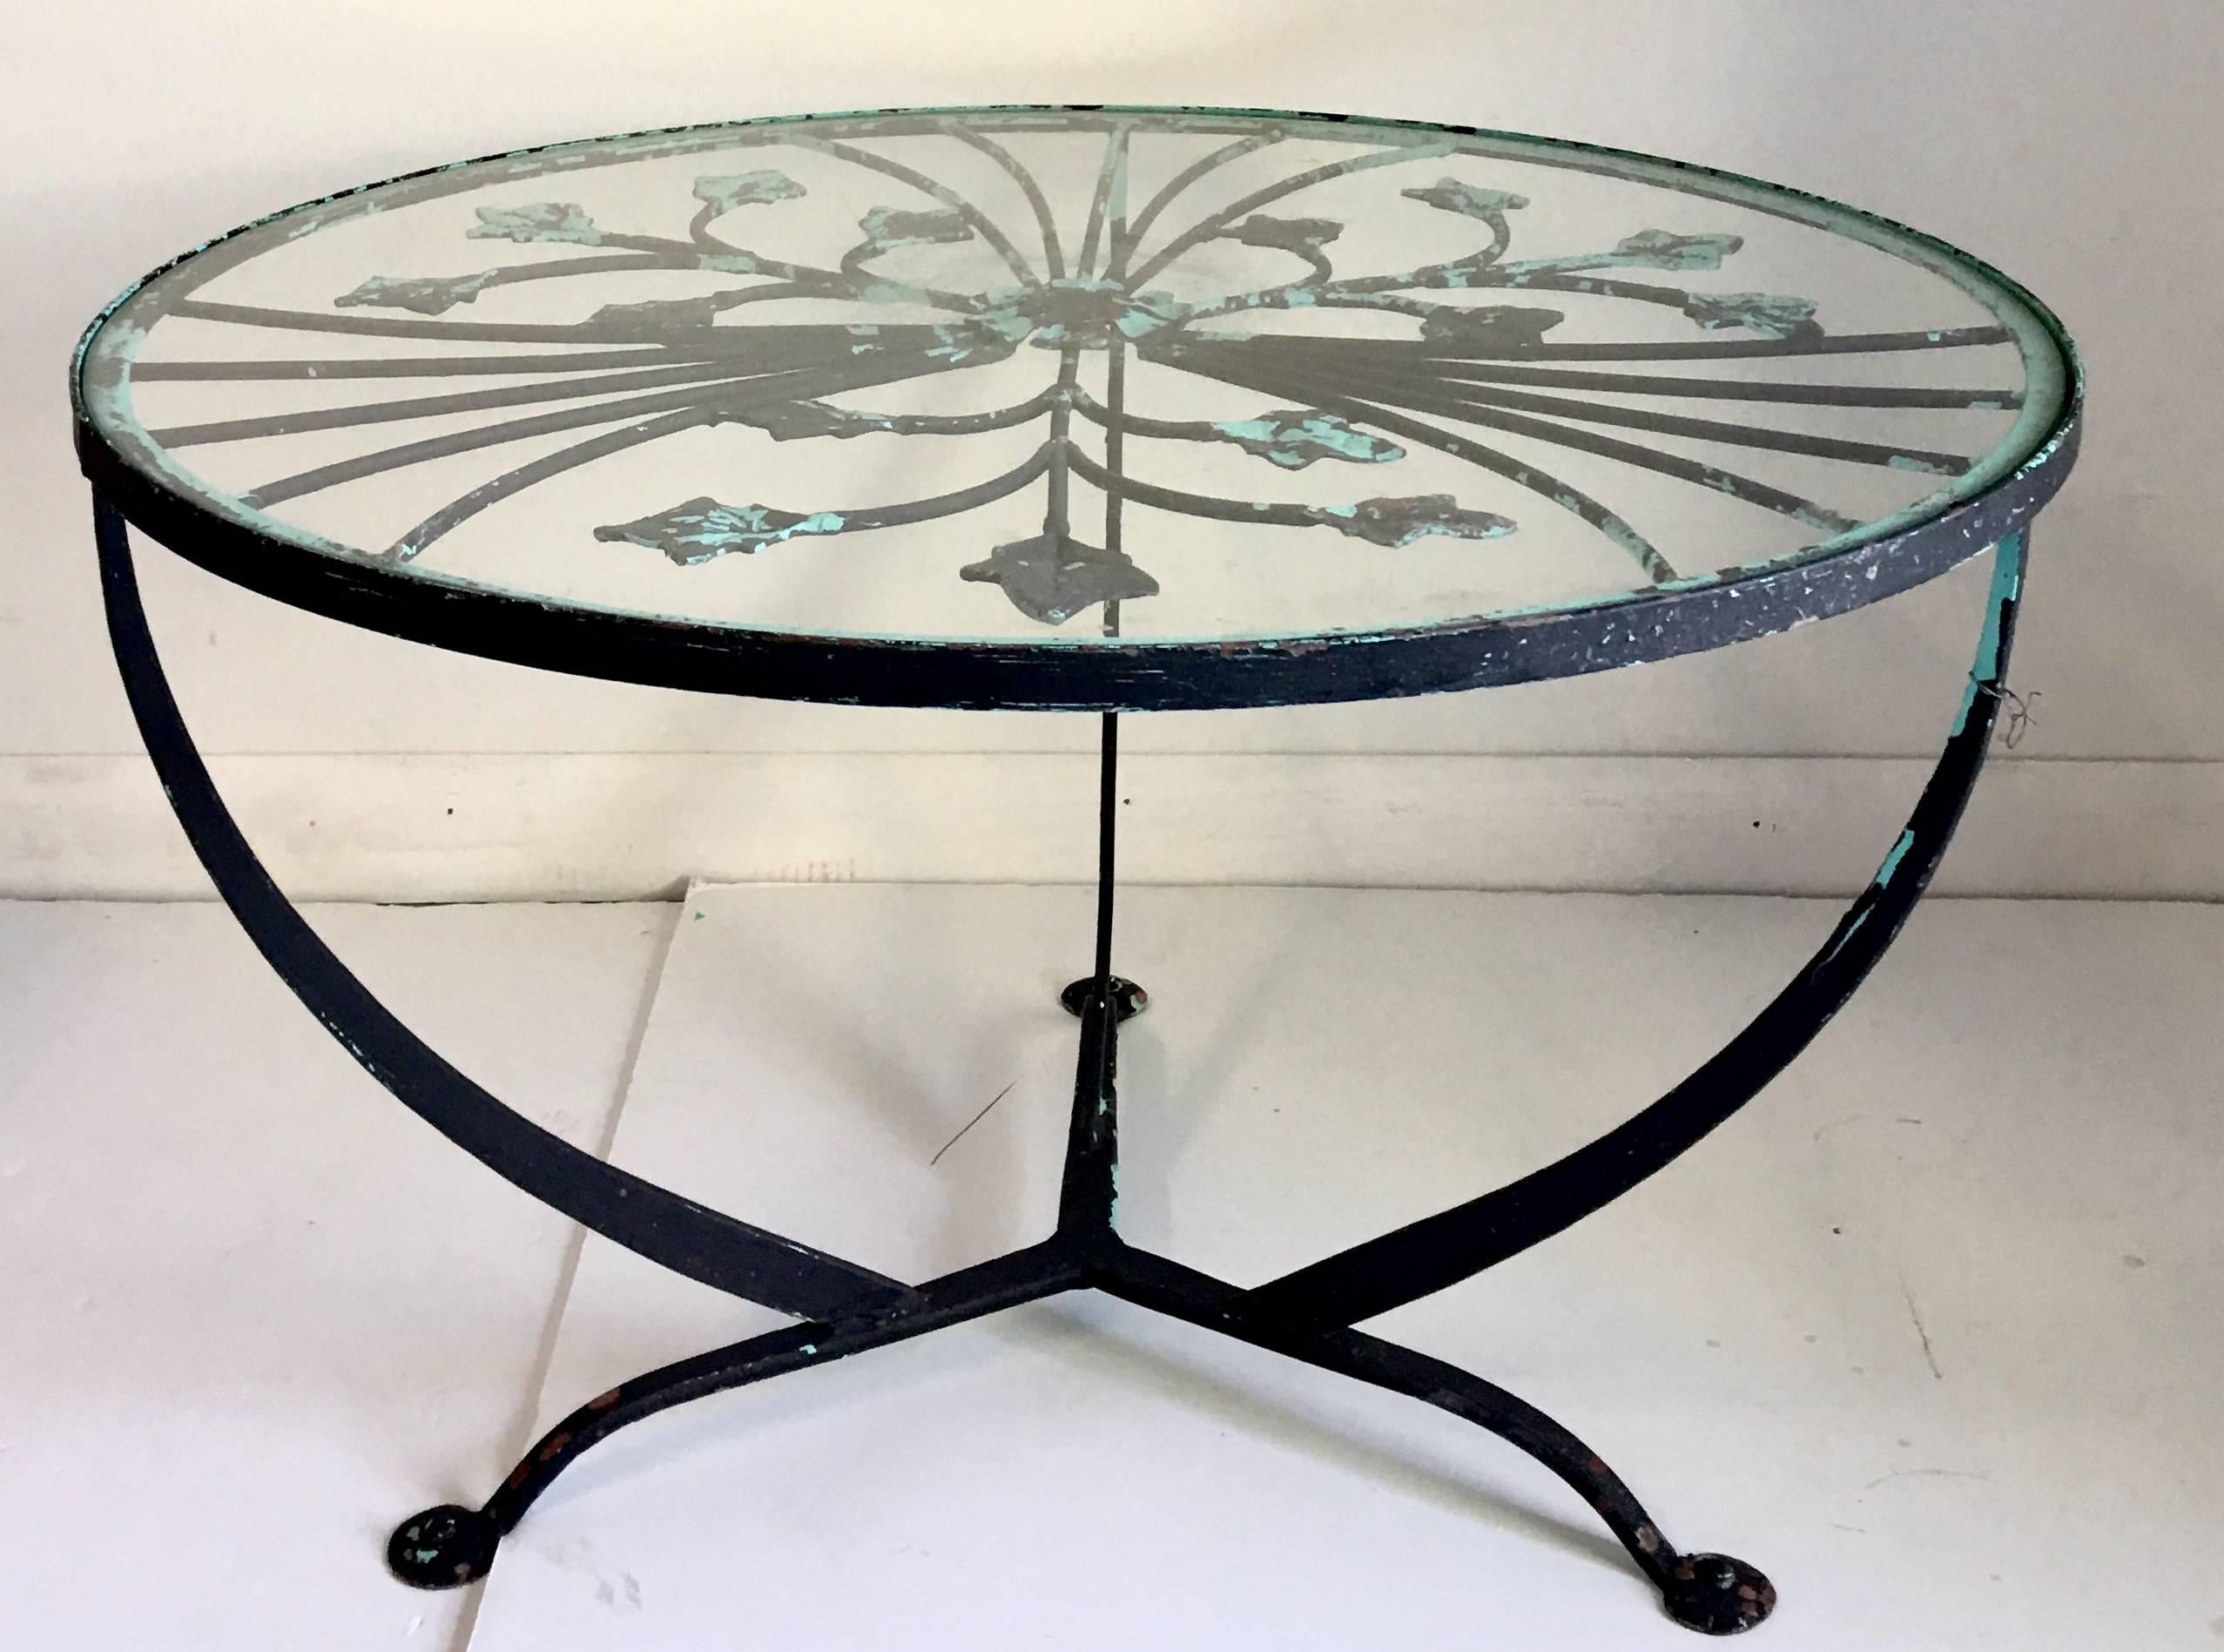 Vintage hand-forged wrought iron French Art Deco style foliate glass top cocktail table. Features a three leg tripod base and painted in distressed verdigris green. Includes a glass top.